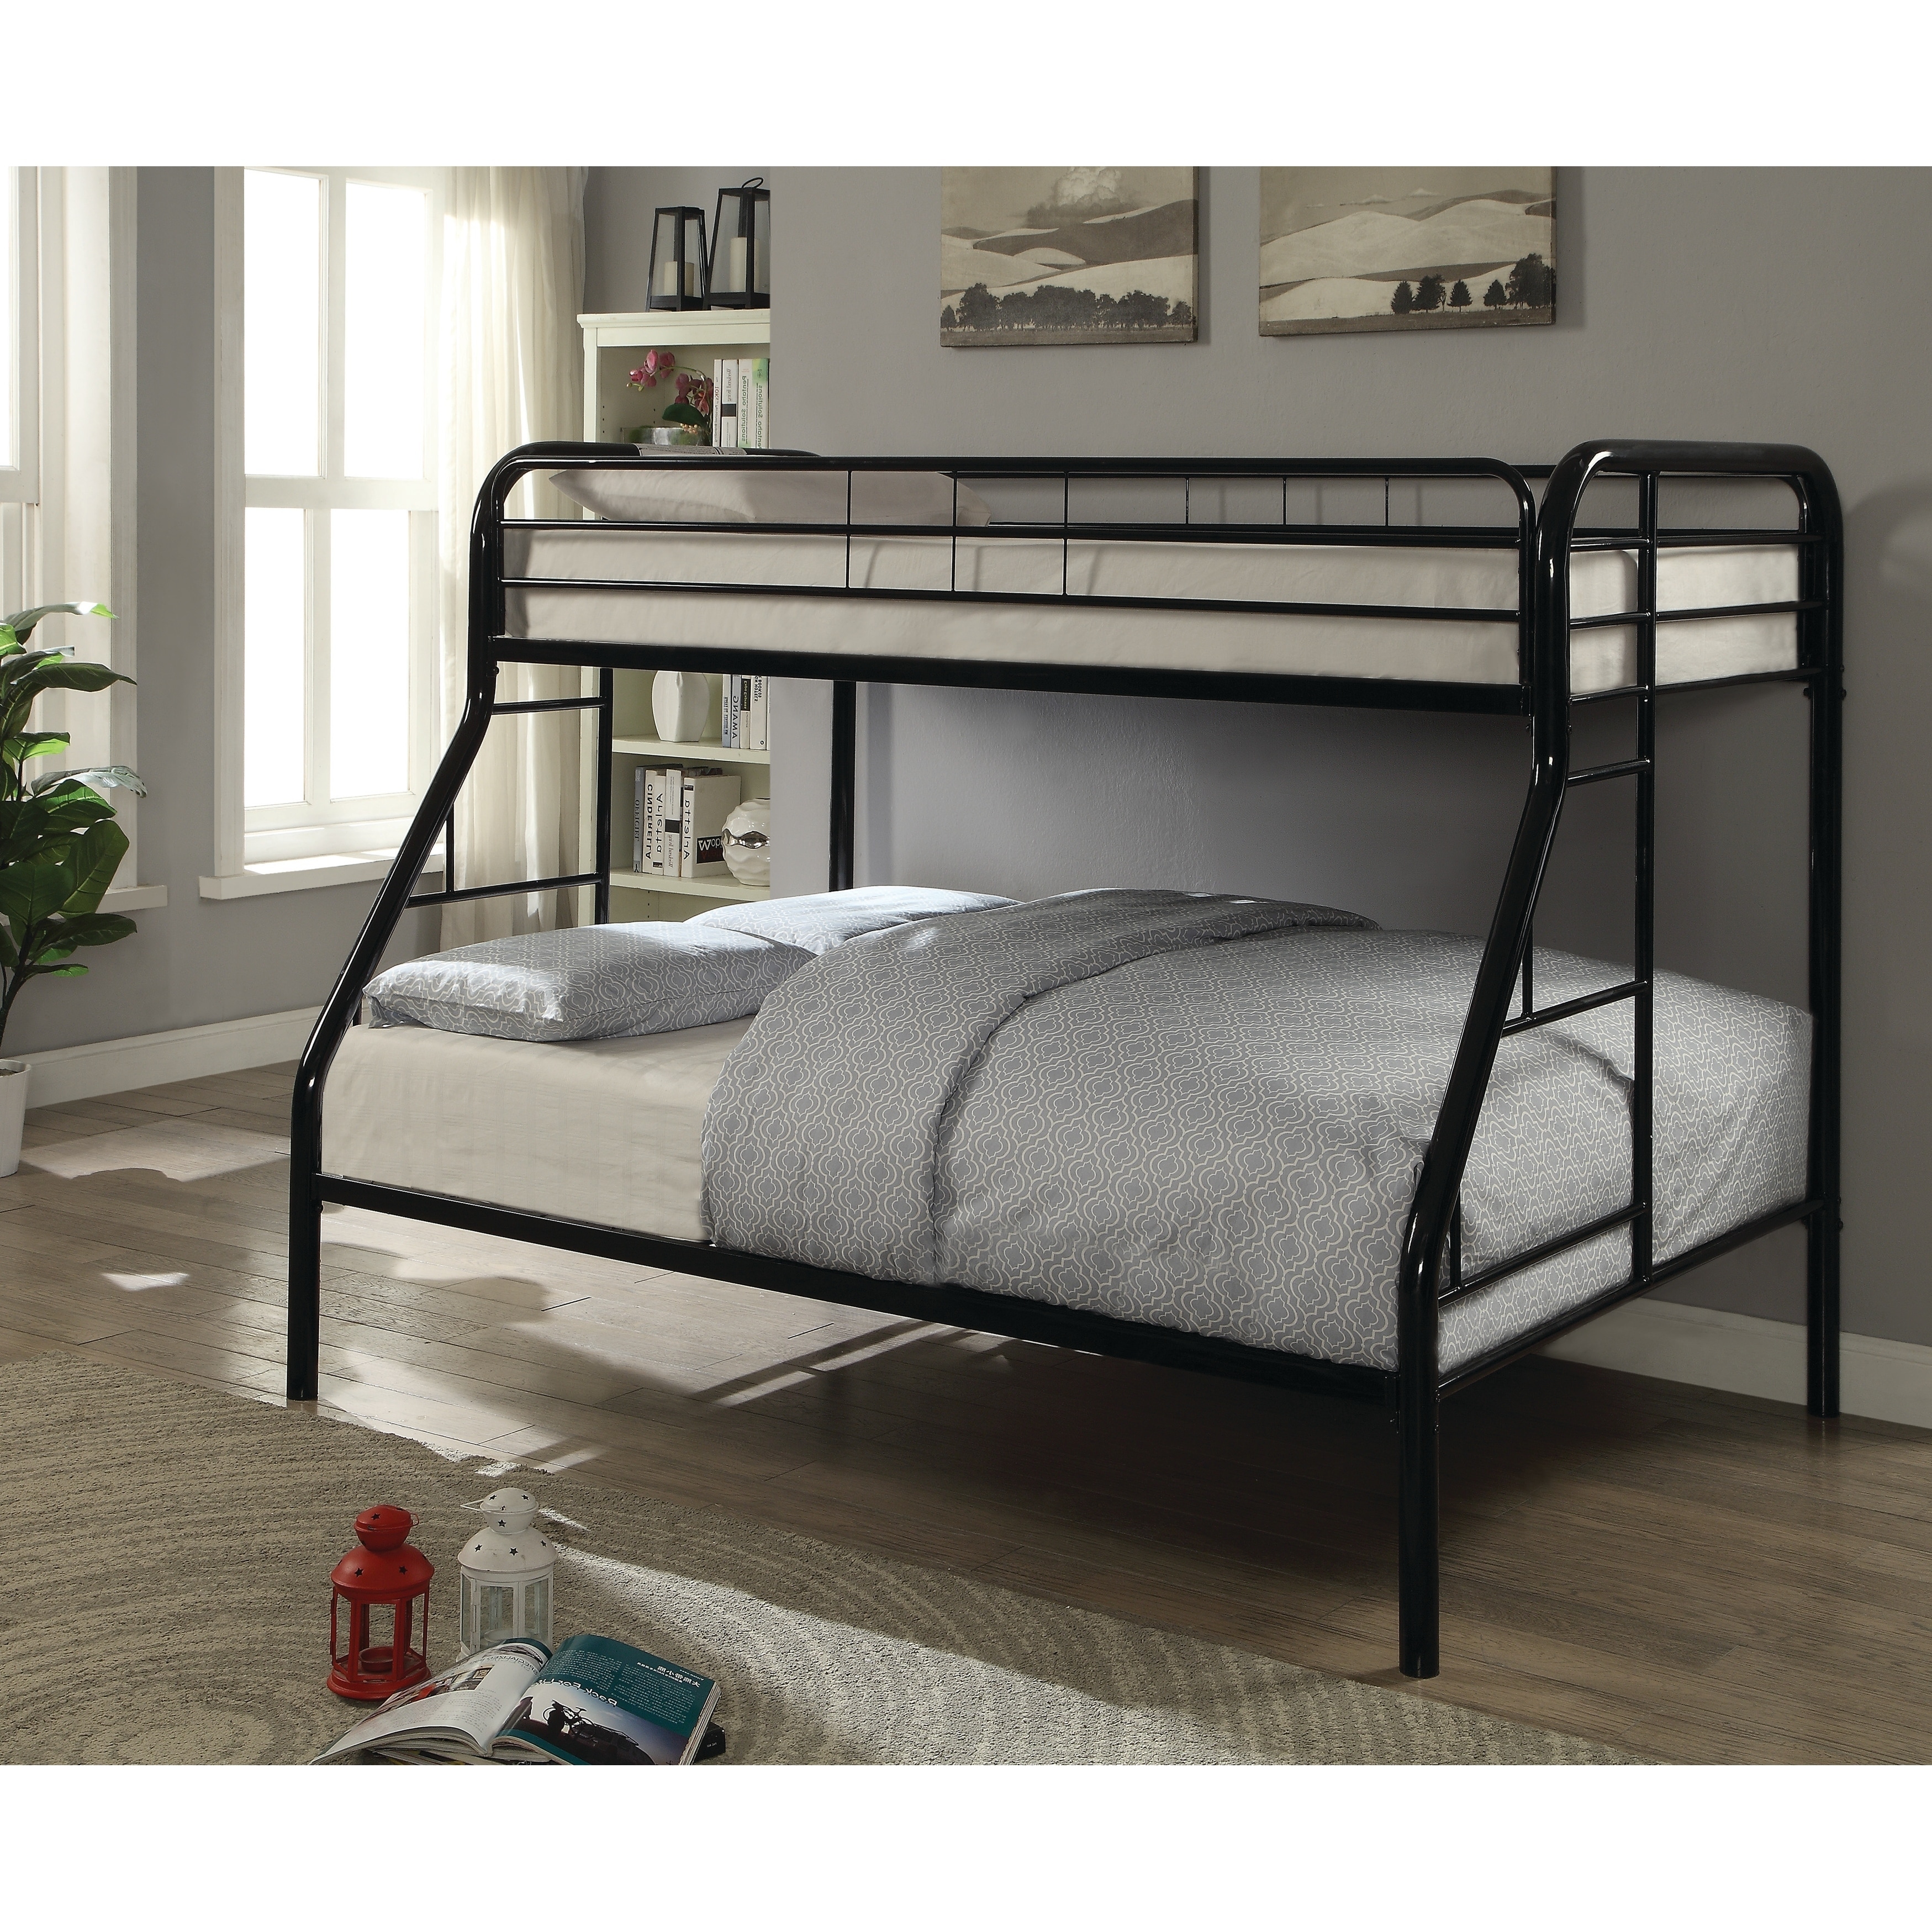 ebay bunk beds twin over full